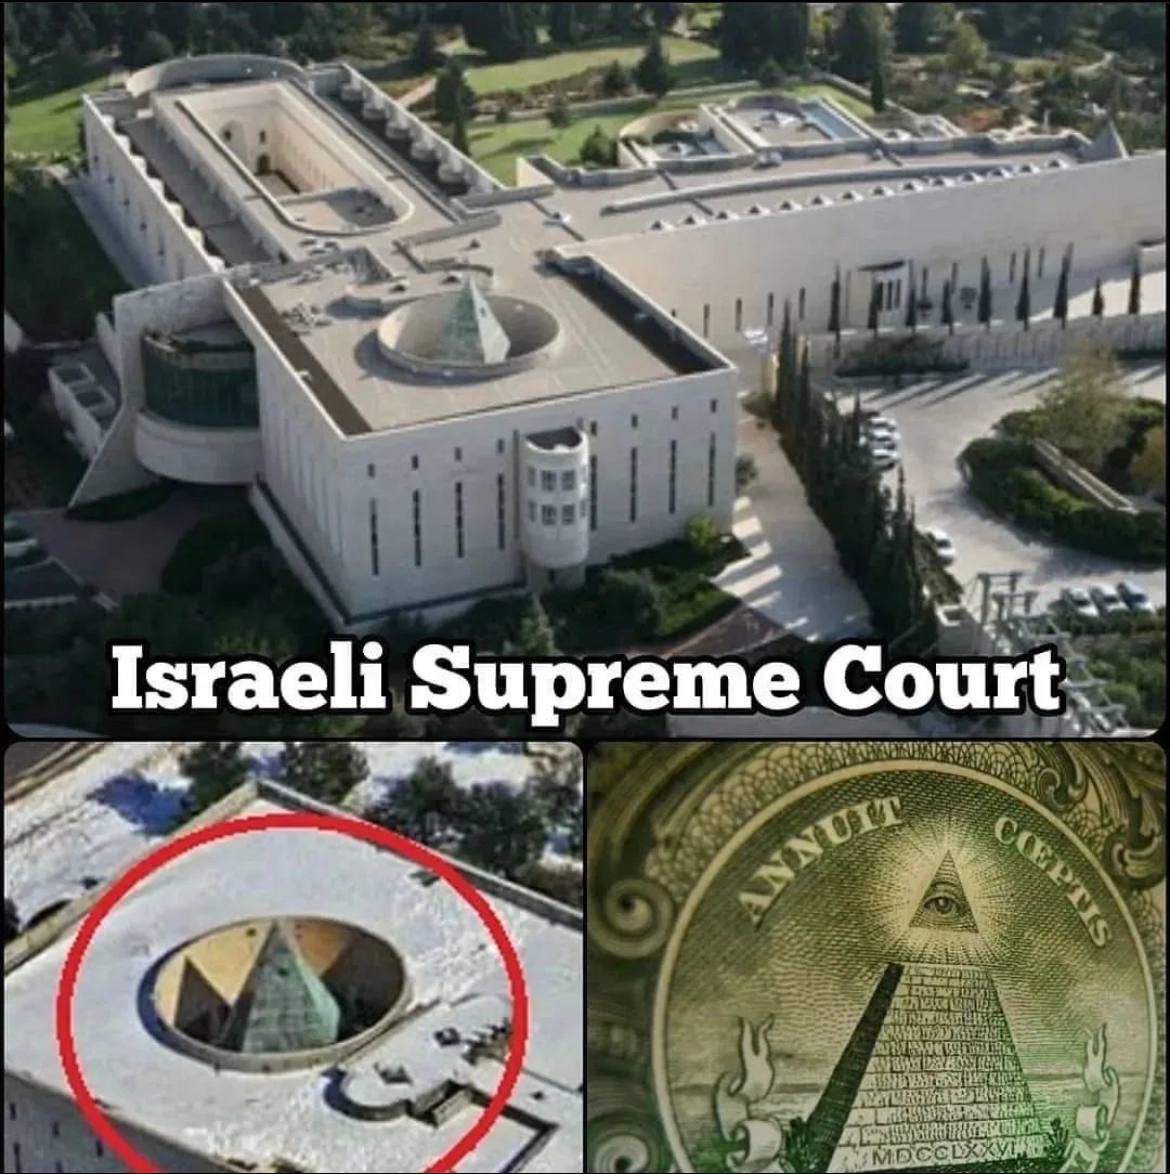 THREAD🧵

THE EGYPTIAN MASONIC SUPREME COURT OF ISRAEL

The coveted project of the Illuminati satanic New World Order. Completed in 1992 and funded by the Rothschilds. Designed with hidden occult architecture. Set to be the world capital of the New World Order future government